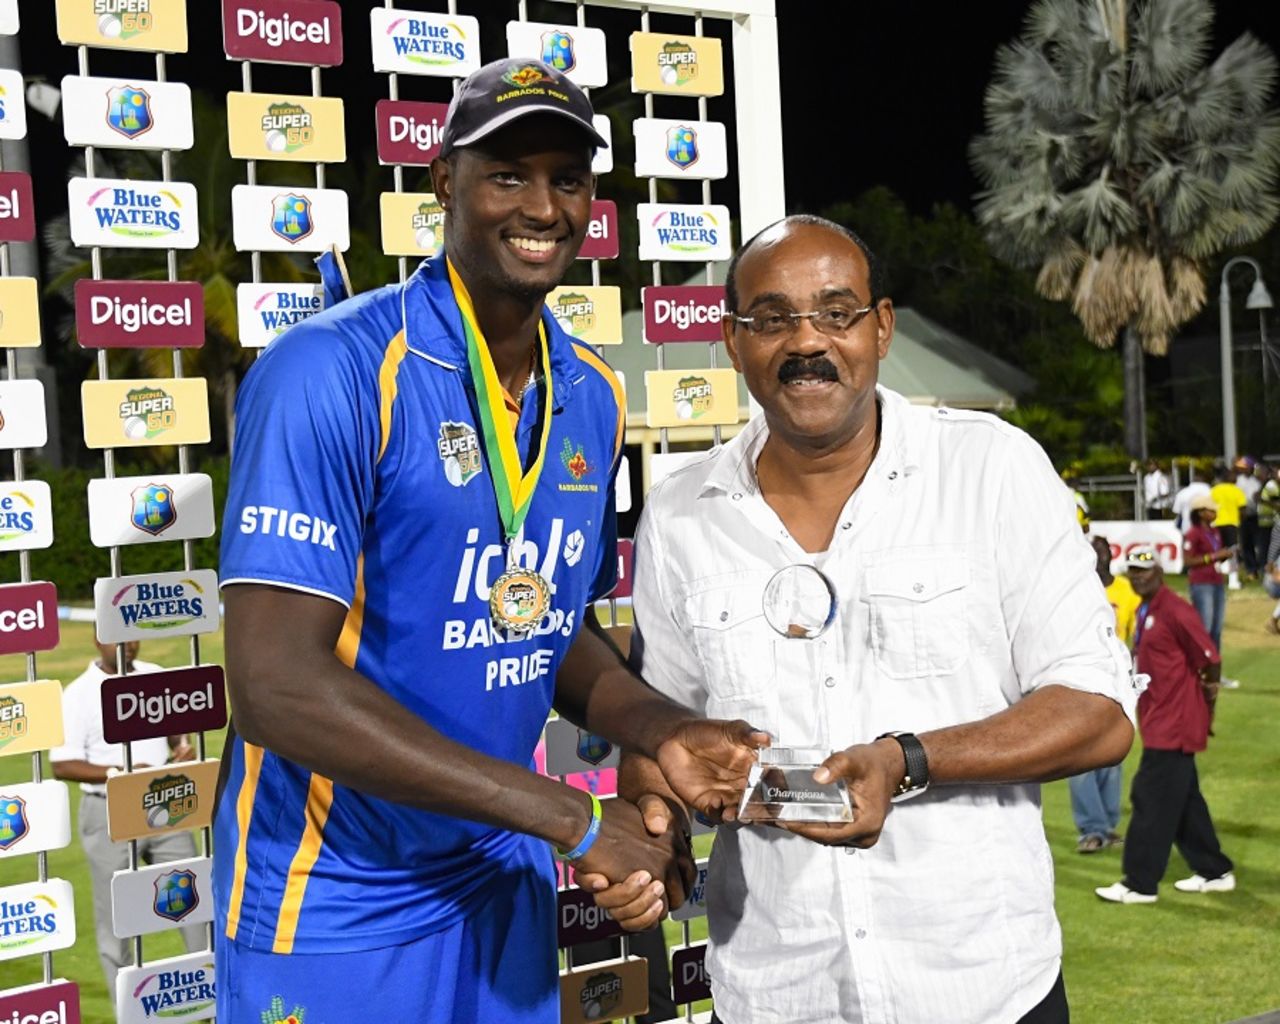 Jason Holder receives the trophy from Antigua and Barbuda Prime Minister Gaston Browne, Barbados v Jamaica, WICB Regional Super50 2016-17, Final, Antigua, February 15, 2017